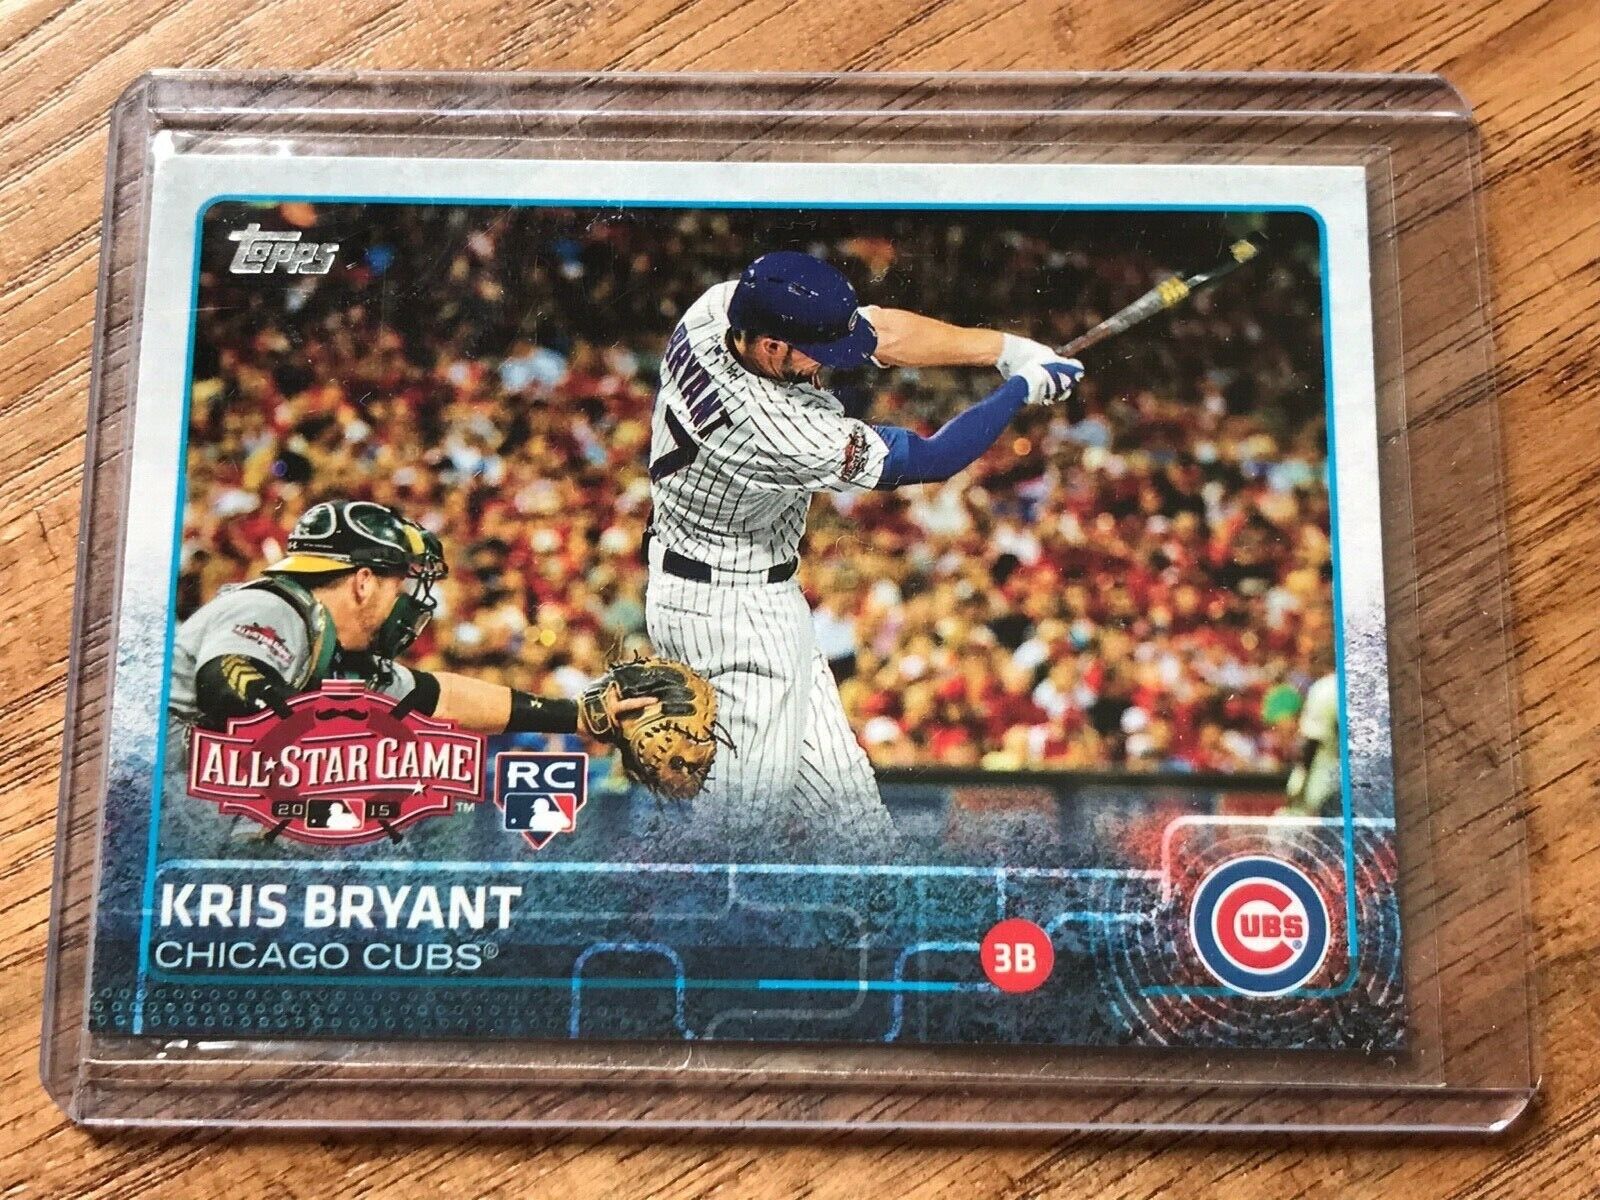 2015 TOPPS UPDATE BASEBALL KRIS BRYANT ASG ROOKIE CARD No.242 Chicago Cubs